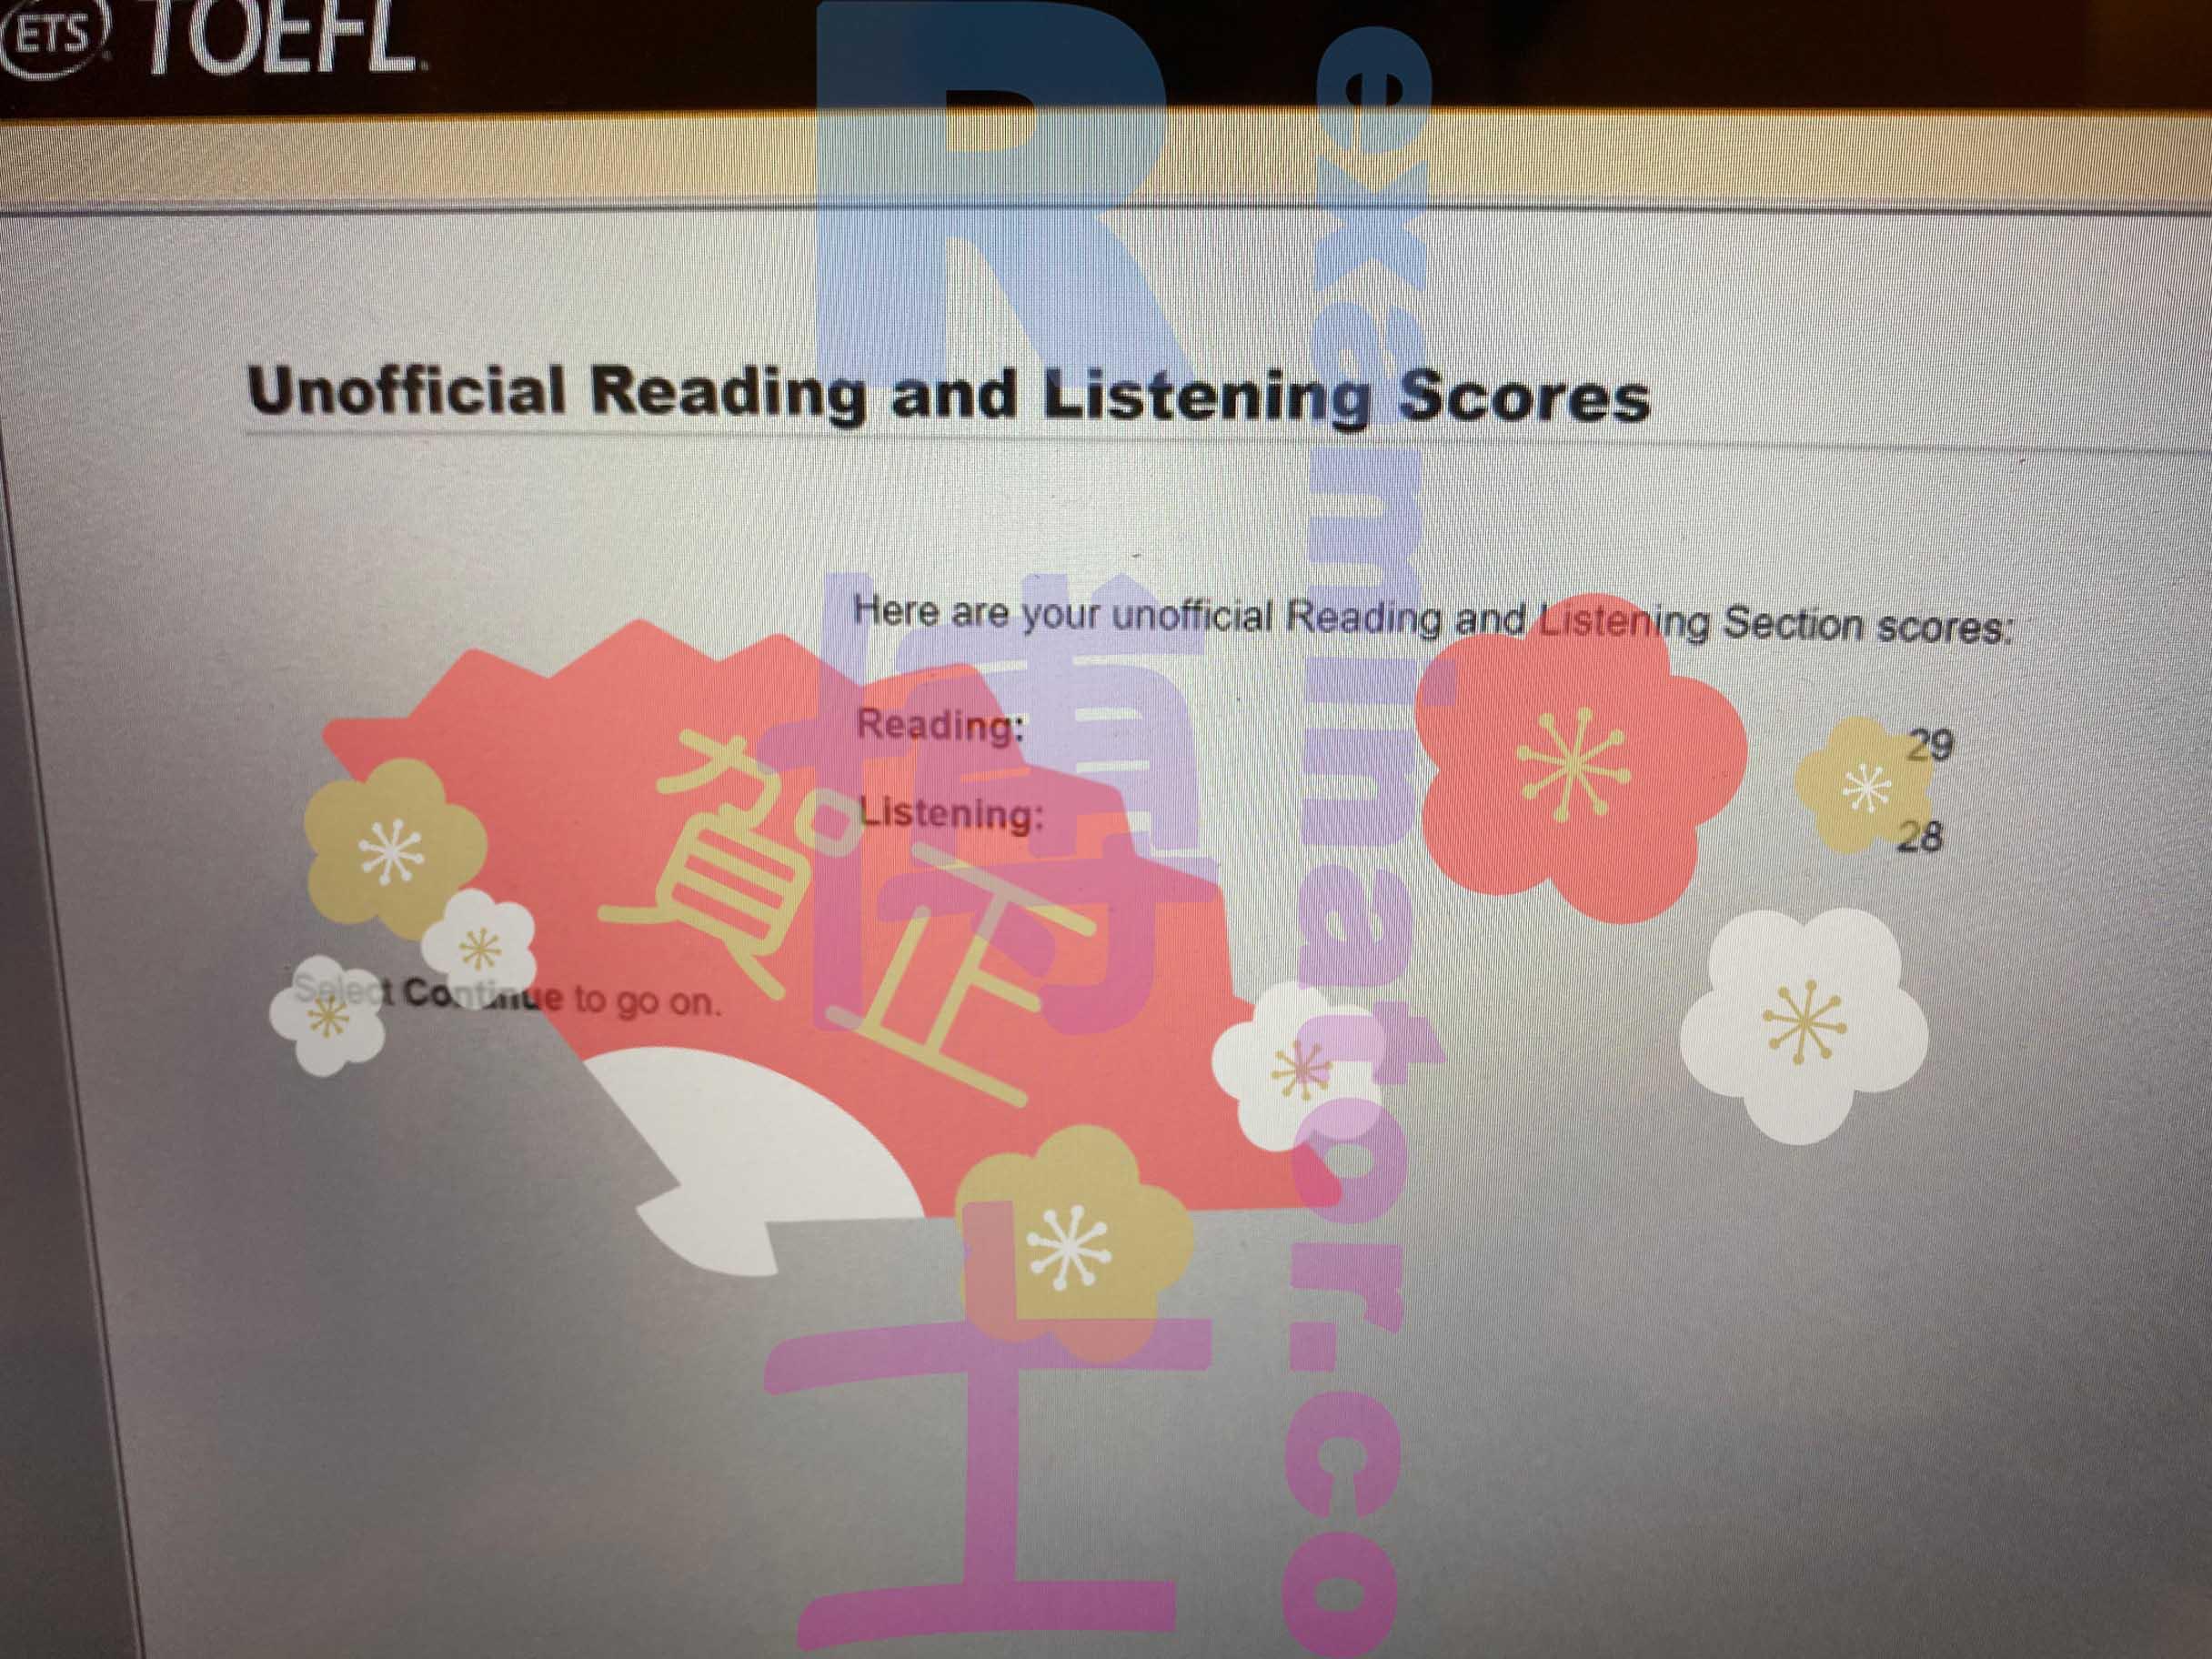 score image for TOEFL Cheating success story #280